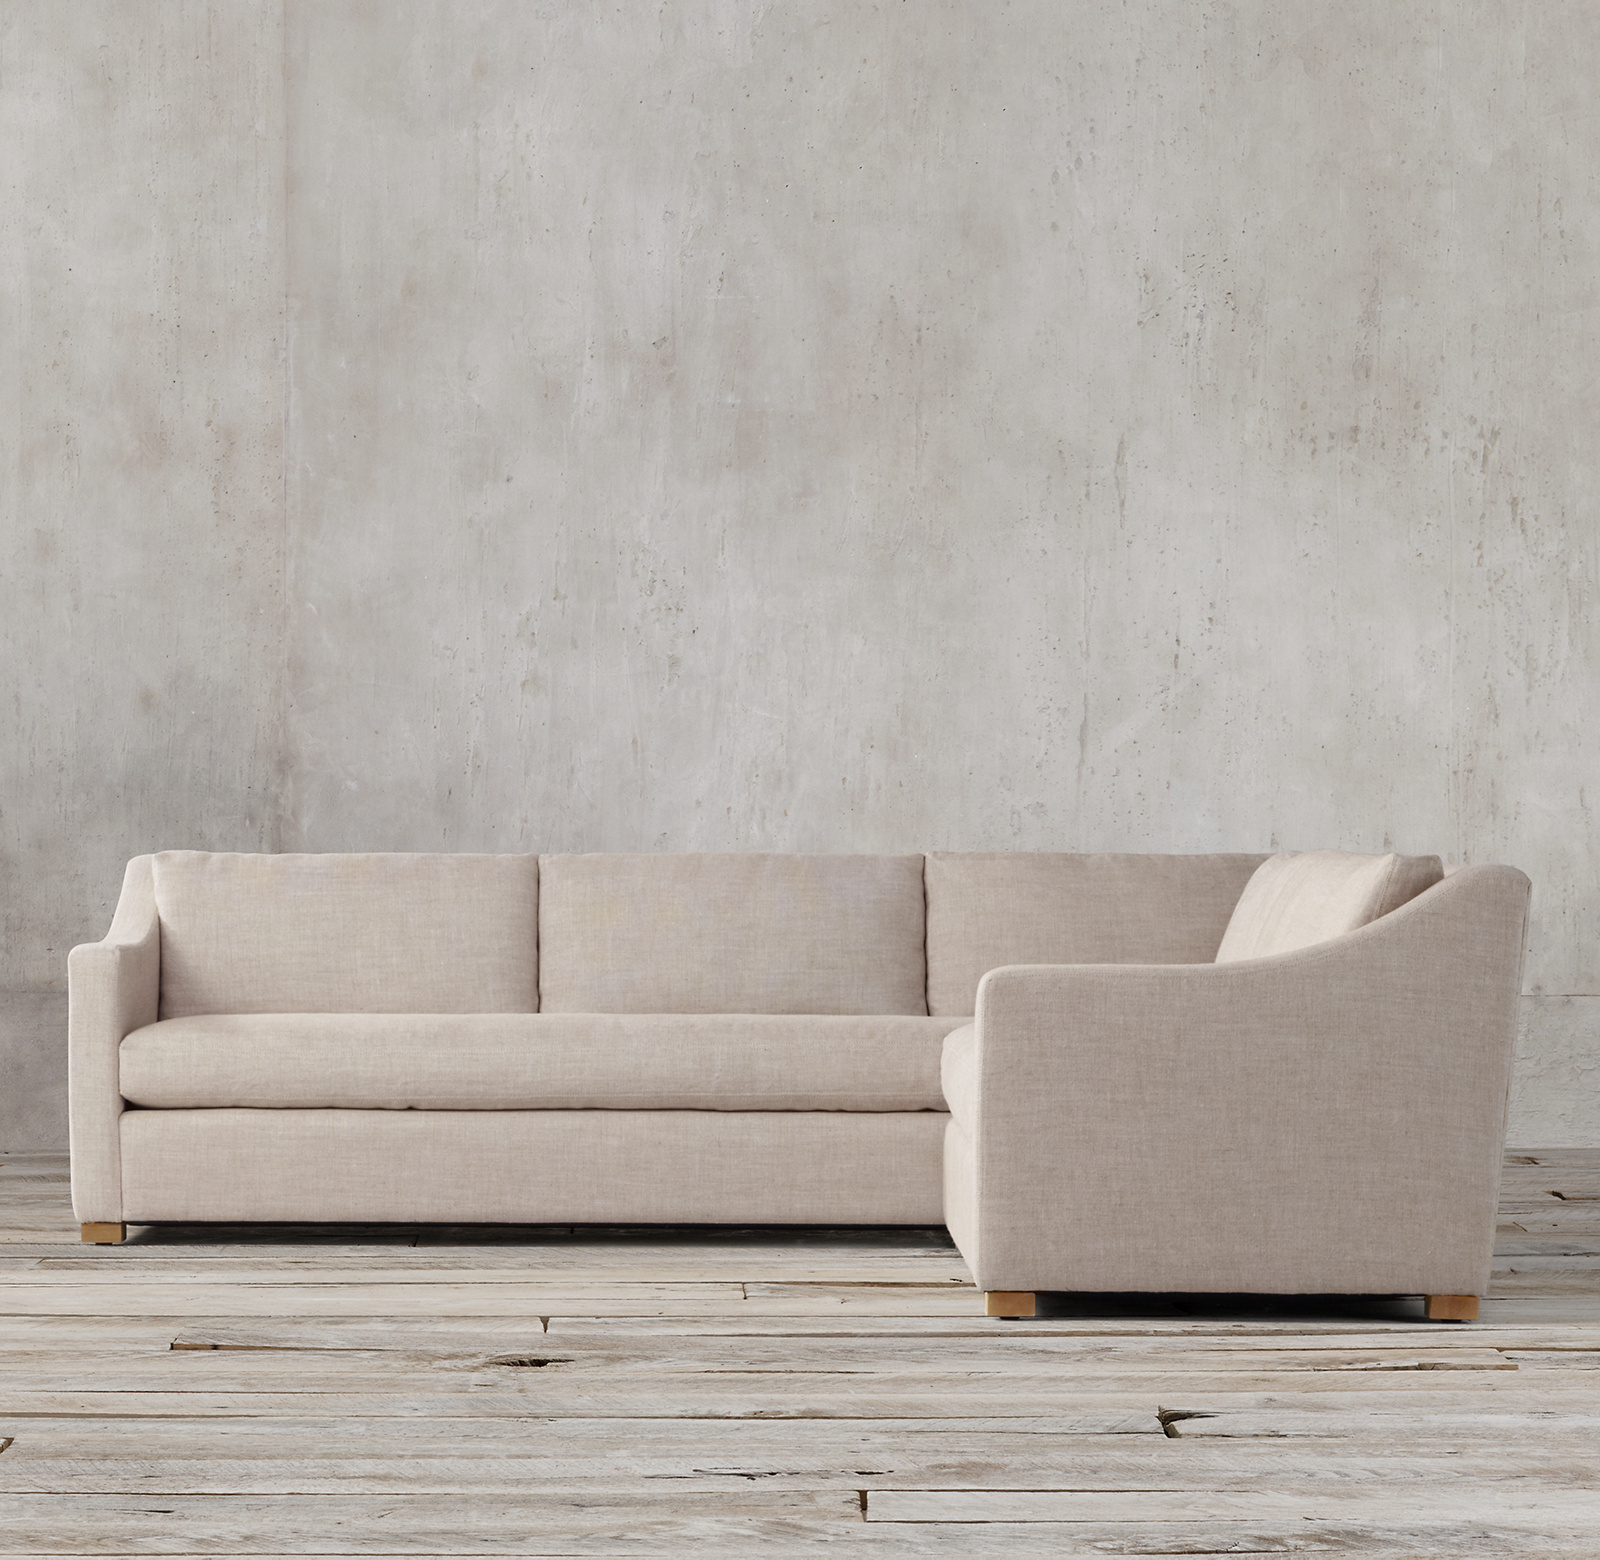 Shown in Sand Belgian Linen; sectional consists of 1 left-arm return sofa and 1 right-arm sofa.